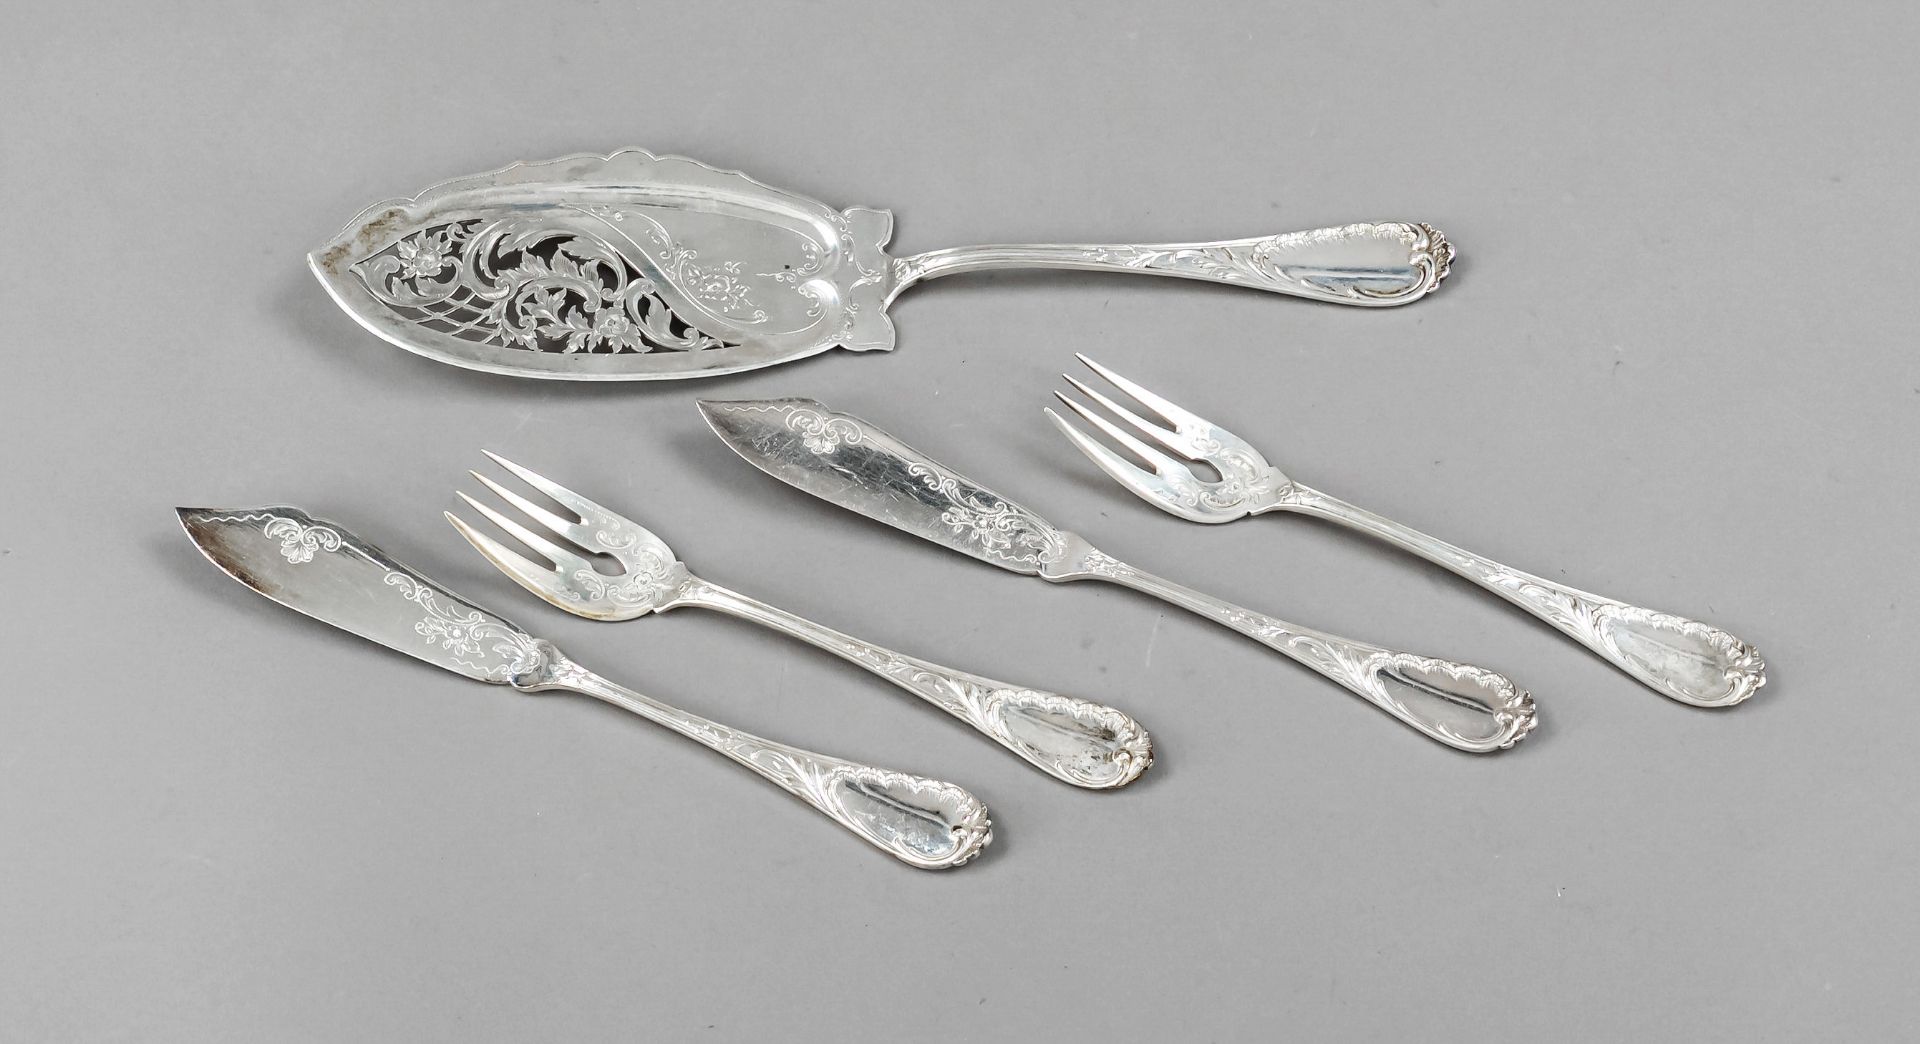 Fish cutlery for twelve persons, German, 20th century, silver 800/000, handles with floral and